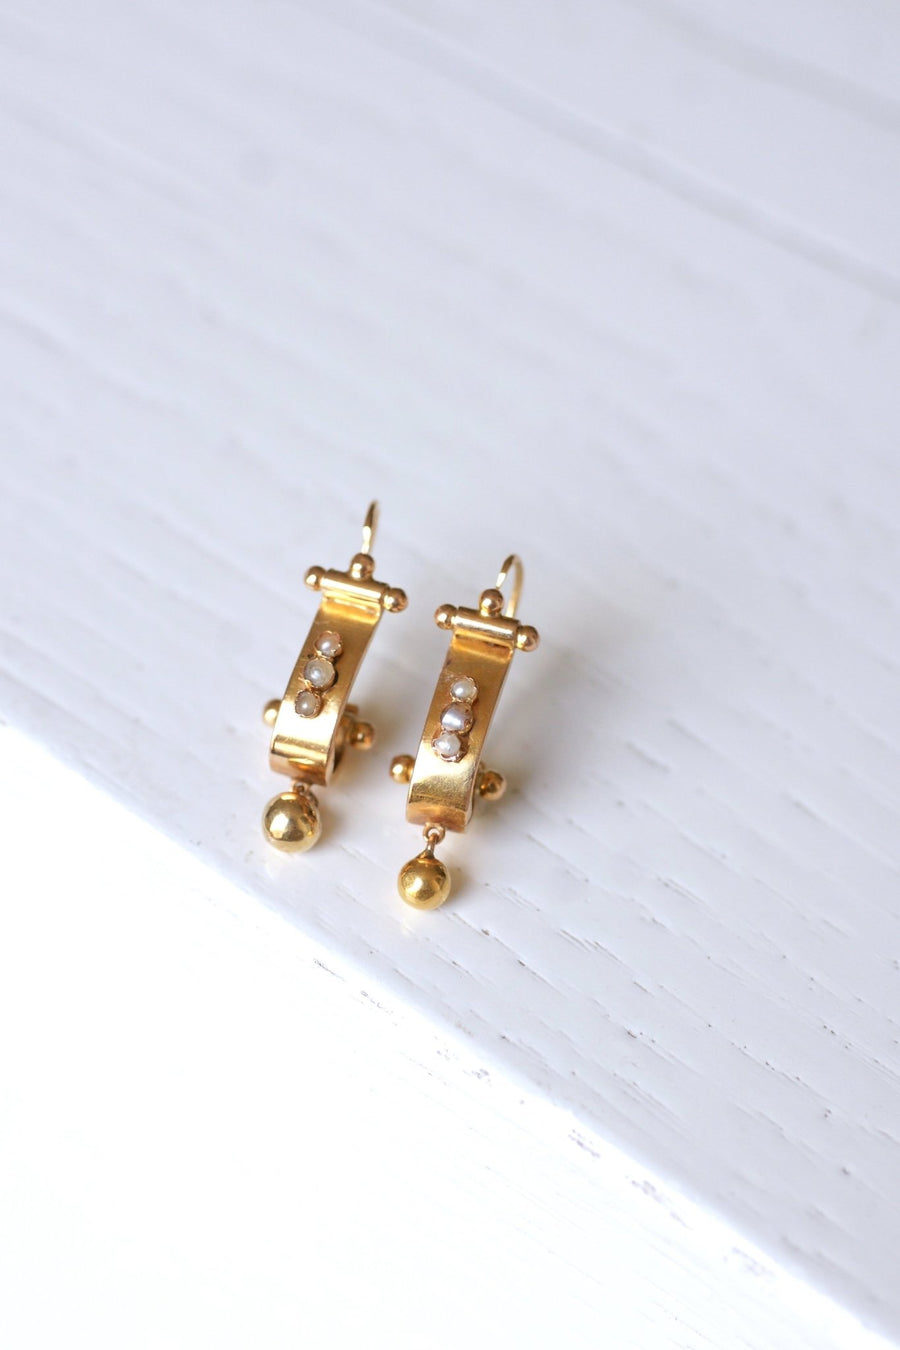 Antique pink gold and pearl earrings - Galerie Pénélope